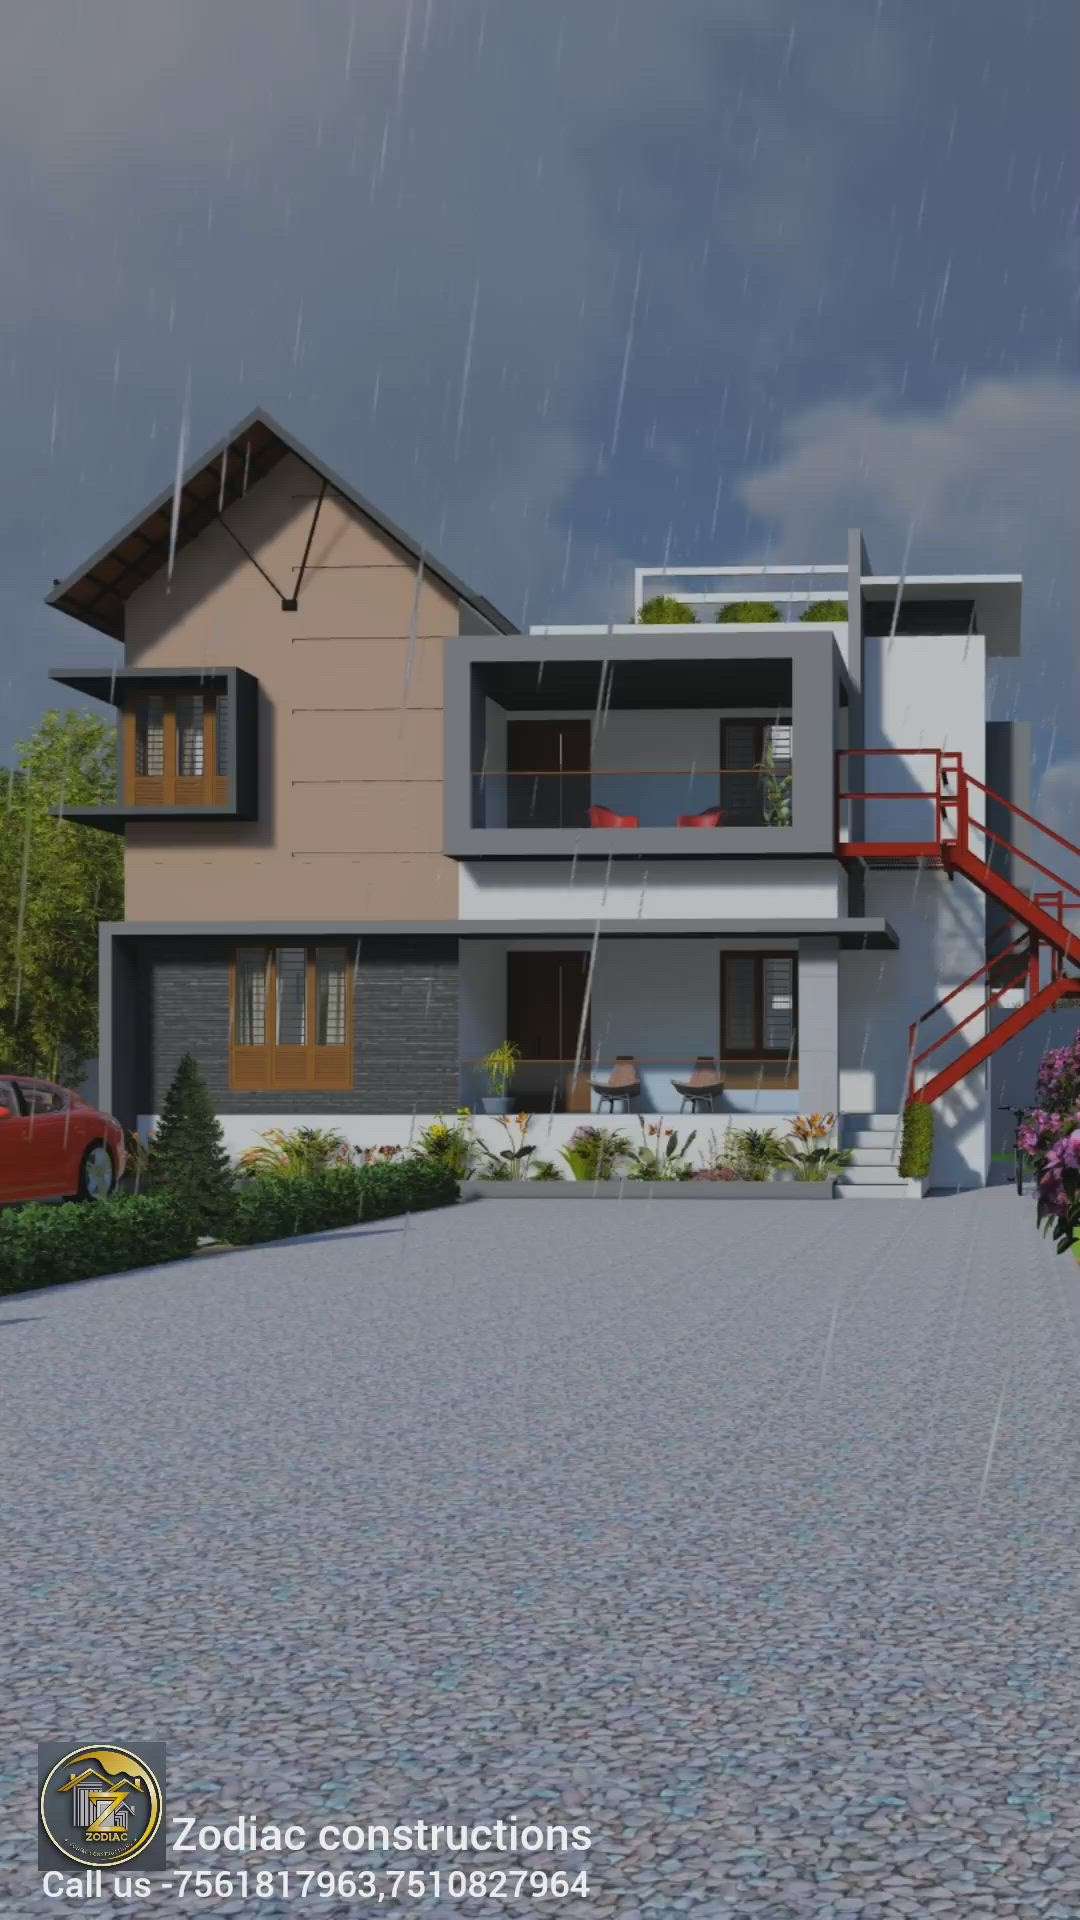 4BHK Residential house 2050sqft @ Budget friendly estimate... Zodiac constructions.. for further details please contact us. 7561817963 , 7510827964....